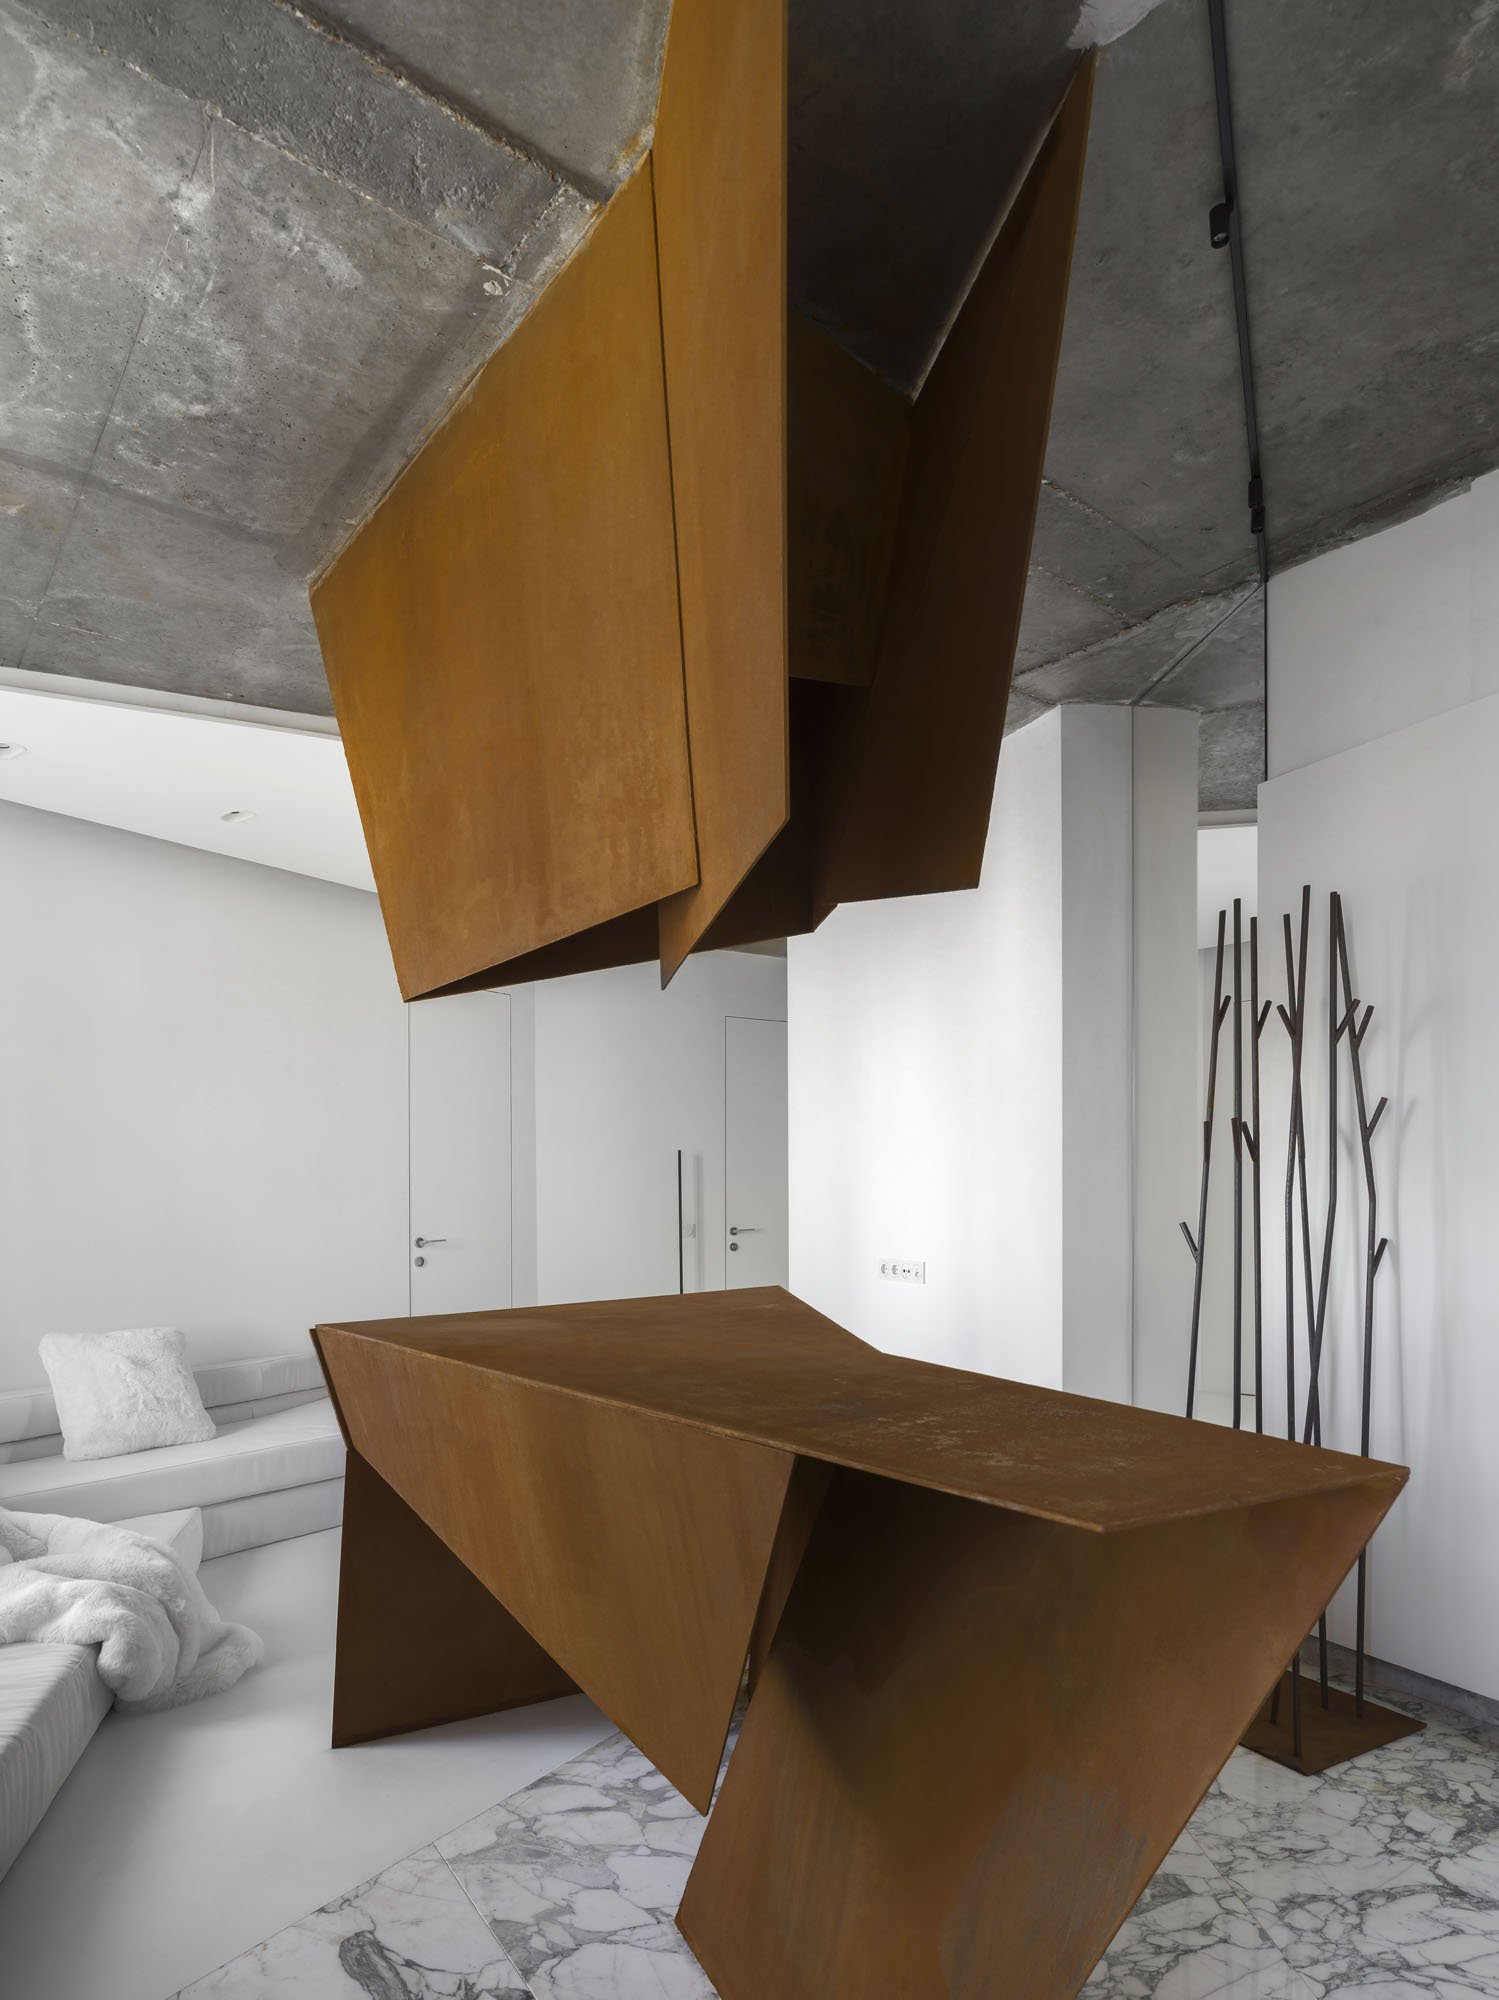 a large sculptural object suspended from the ceiling and rising up from the floor inside an apartment